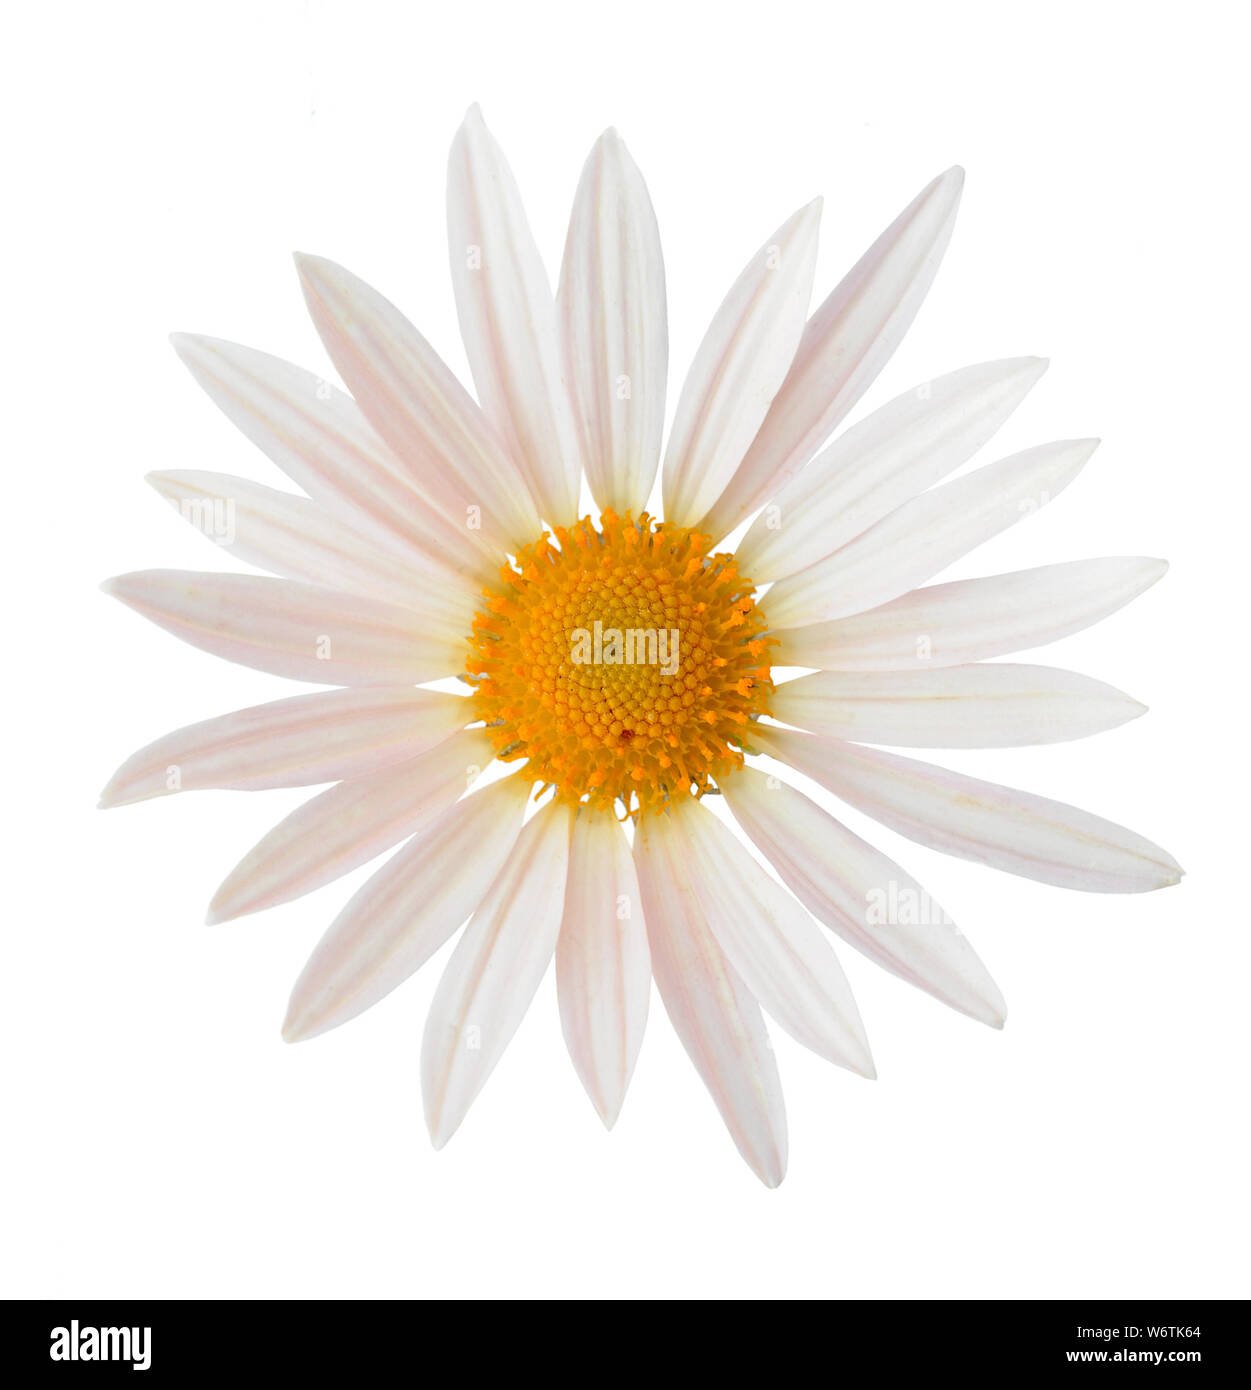 Crown Daisy (Aster Family) isolated on white background Stock Photo